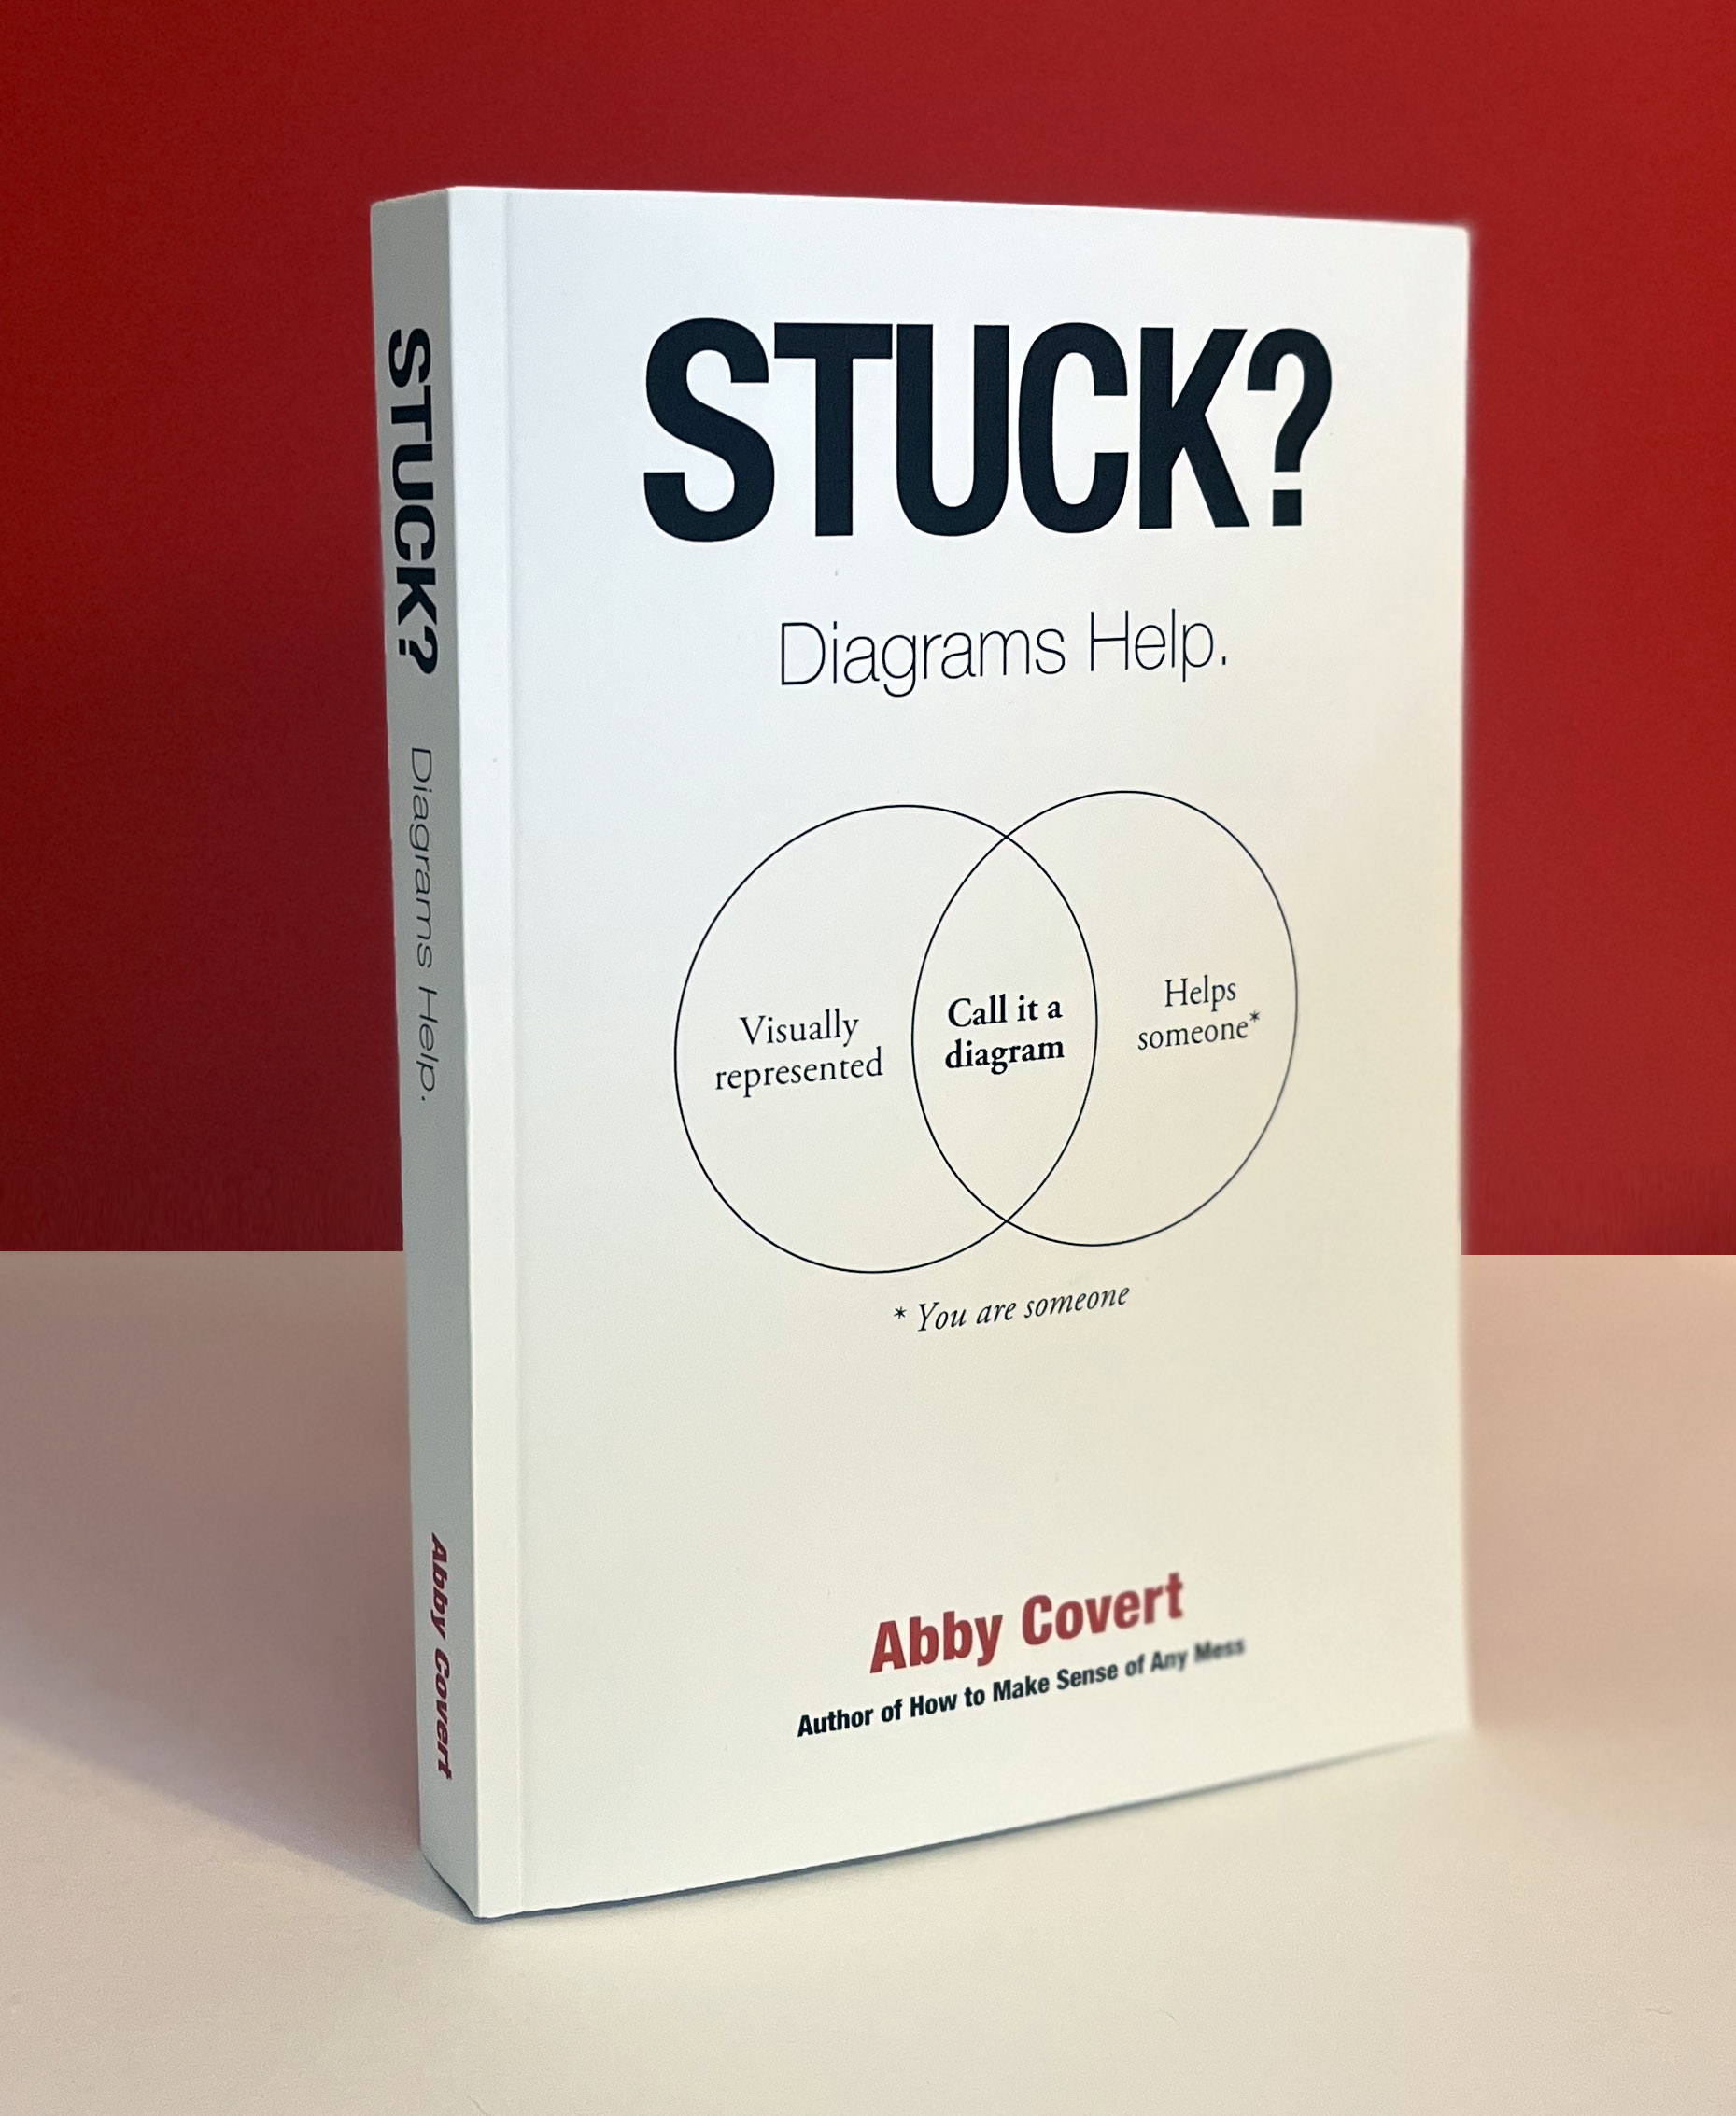 Stuck? Diagrams help. - Abby Covert, Information Architect